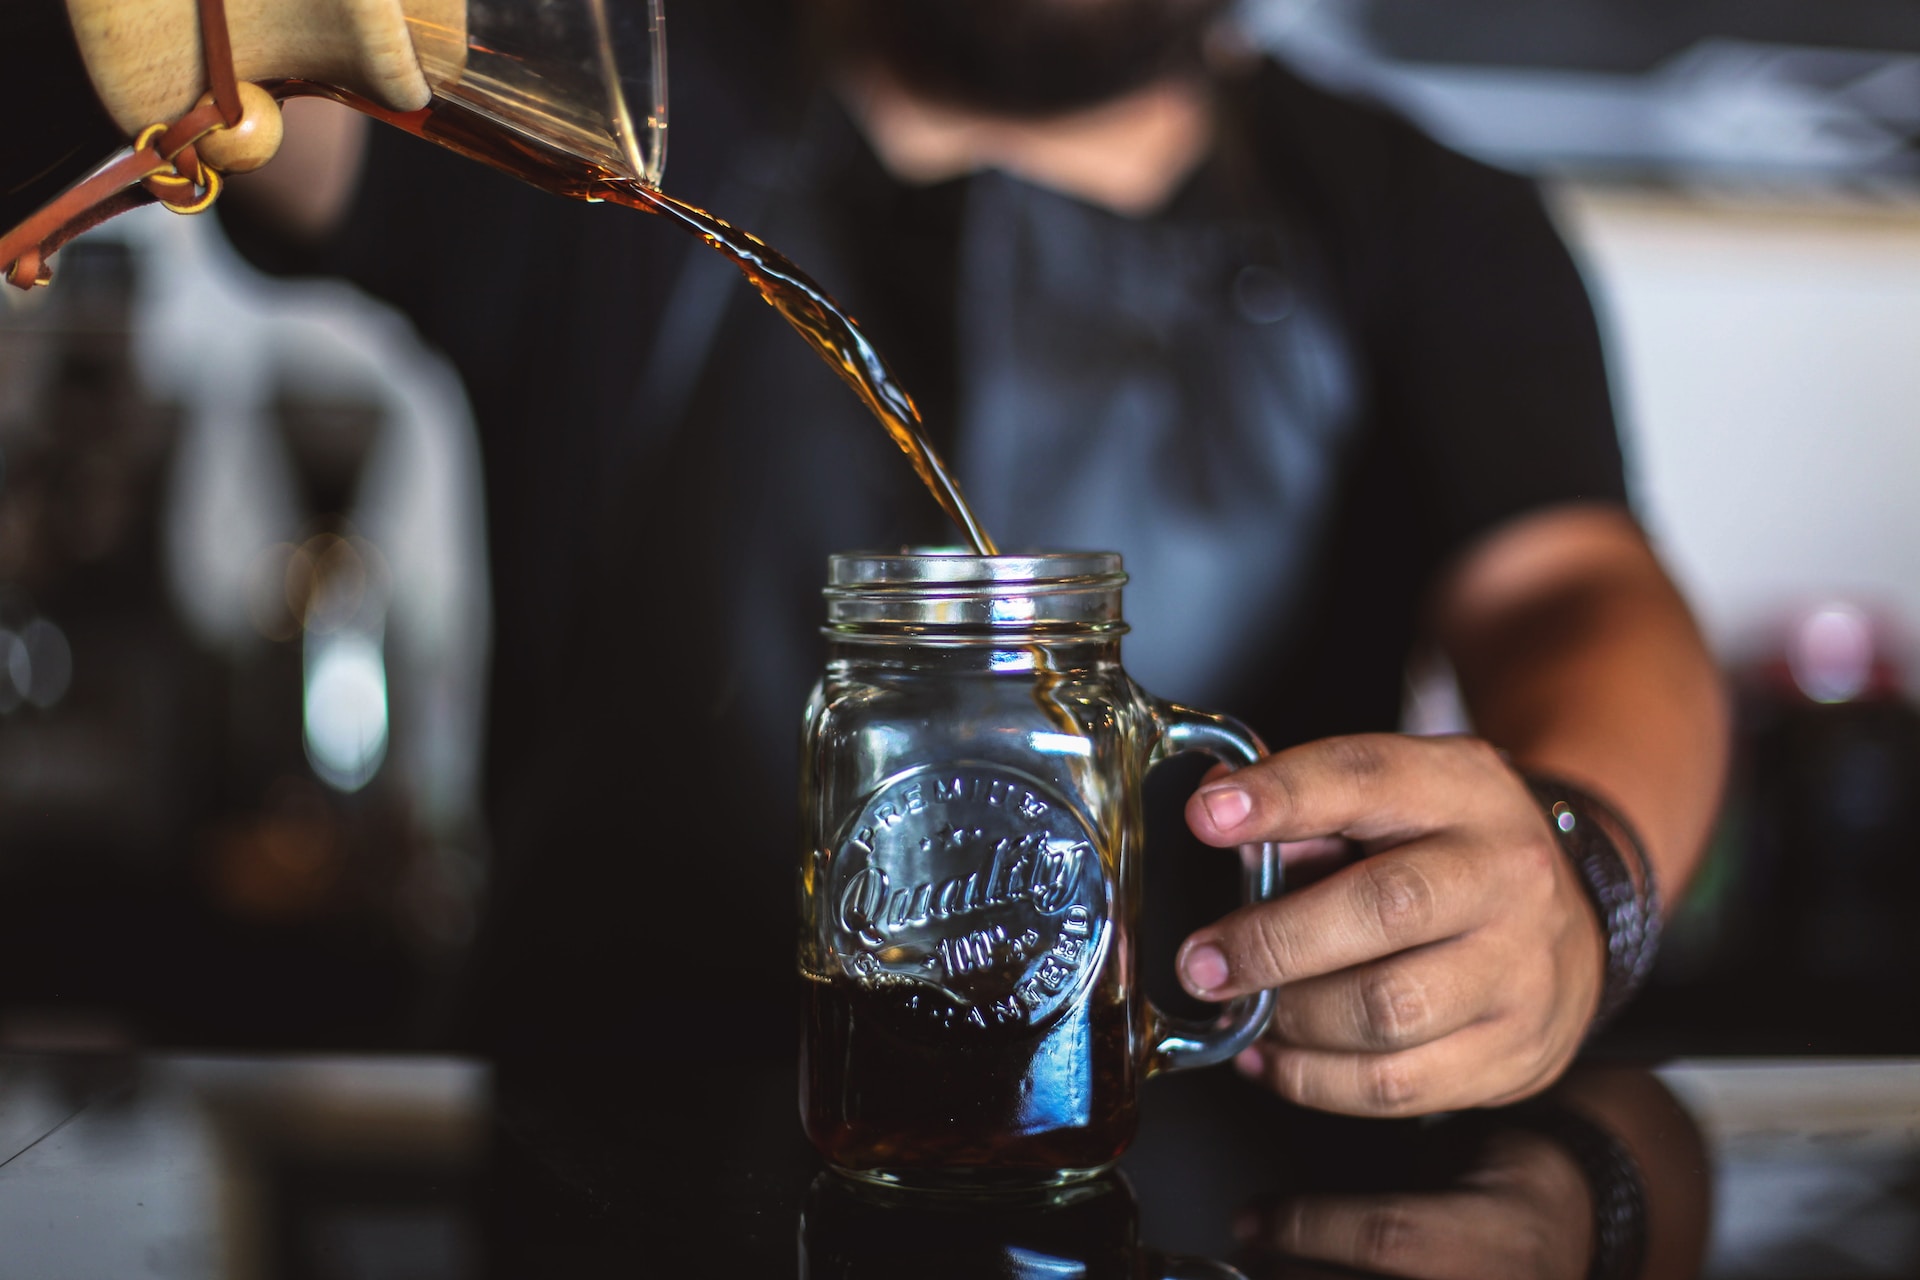 A barista pouring coffee into a glass cup